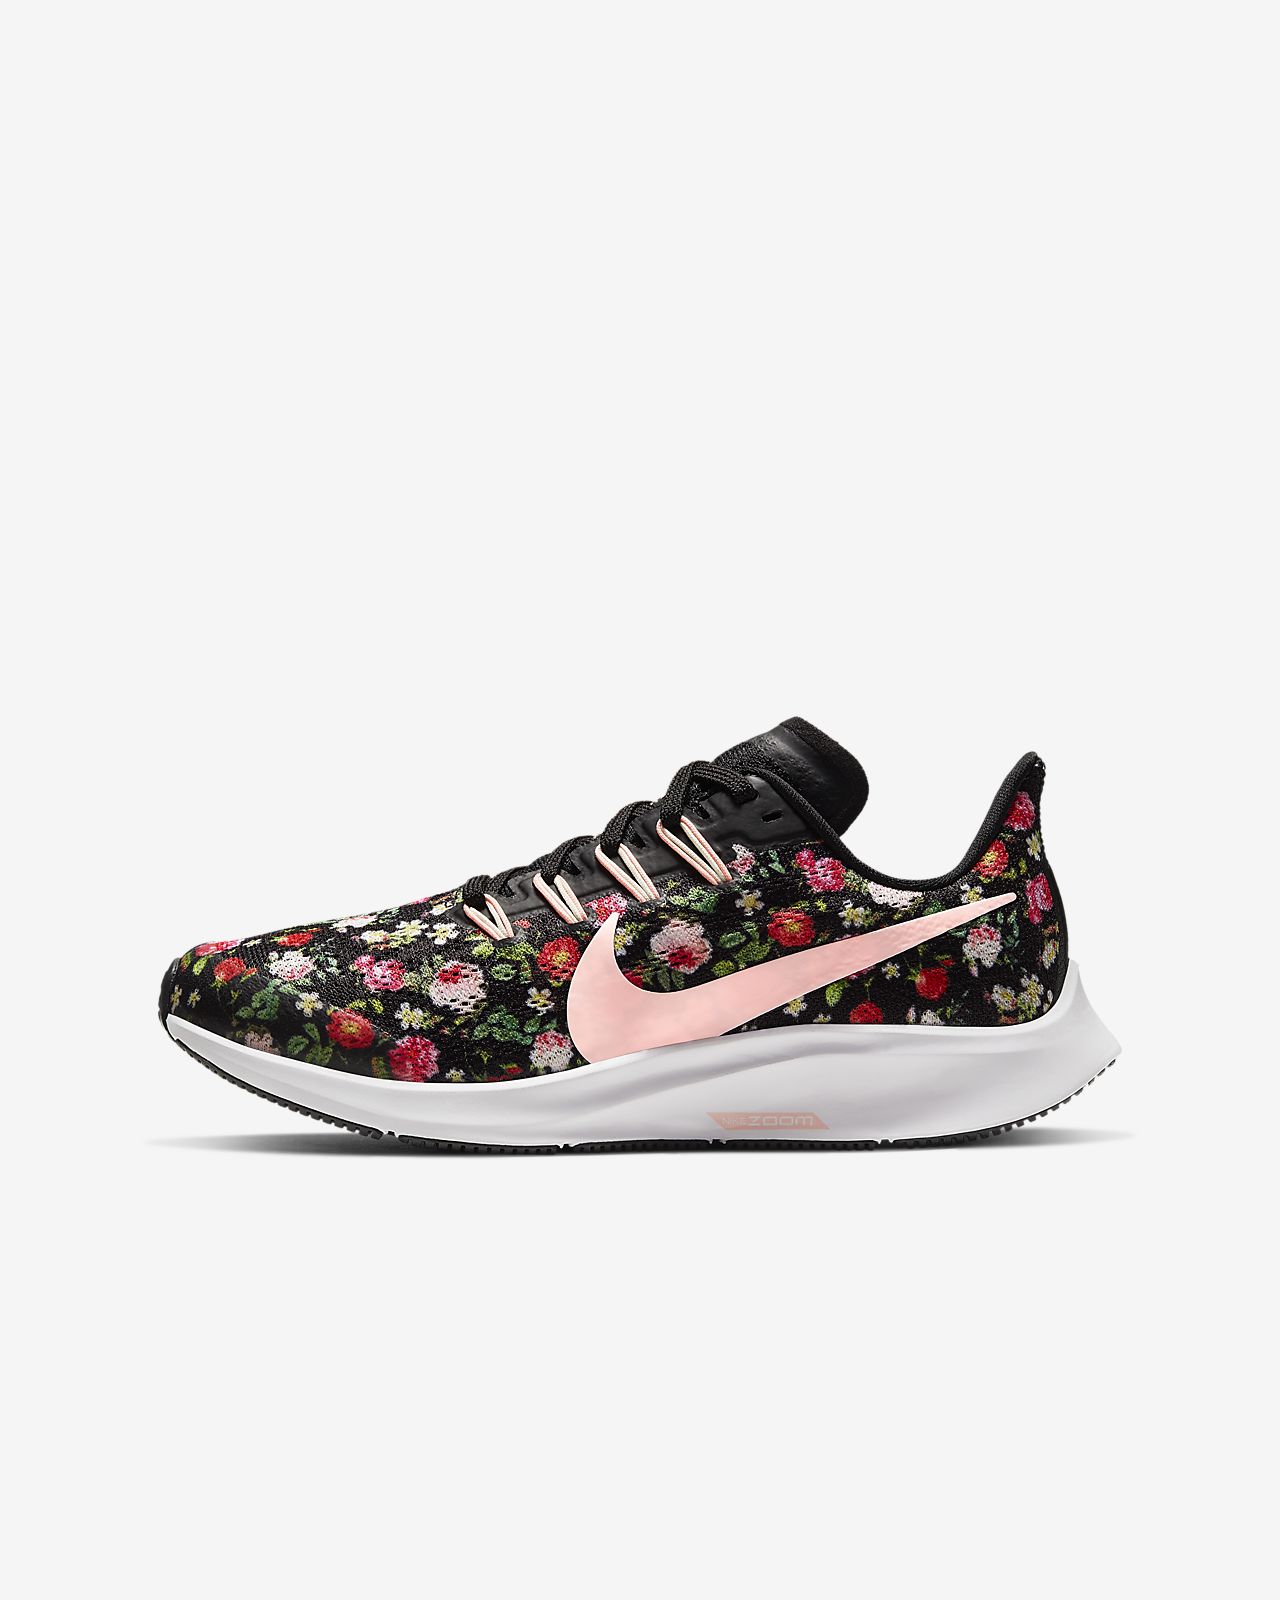 nike tennis floral shoes